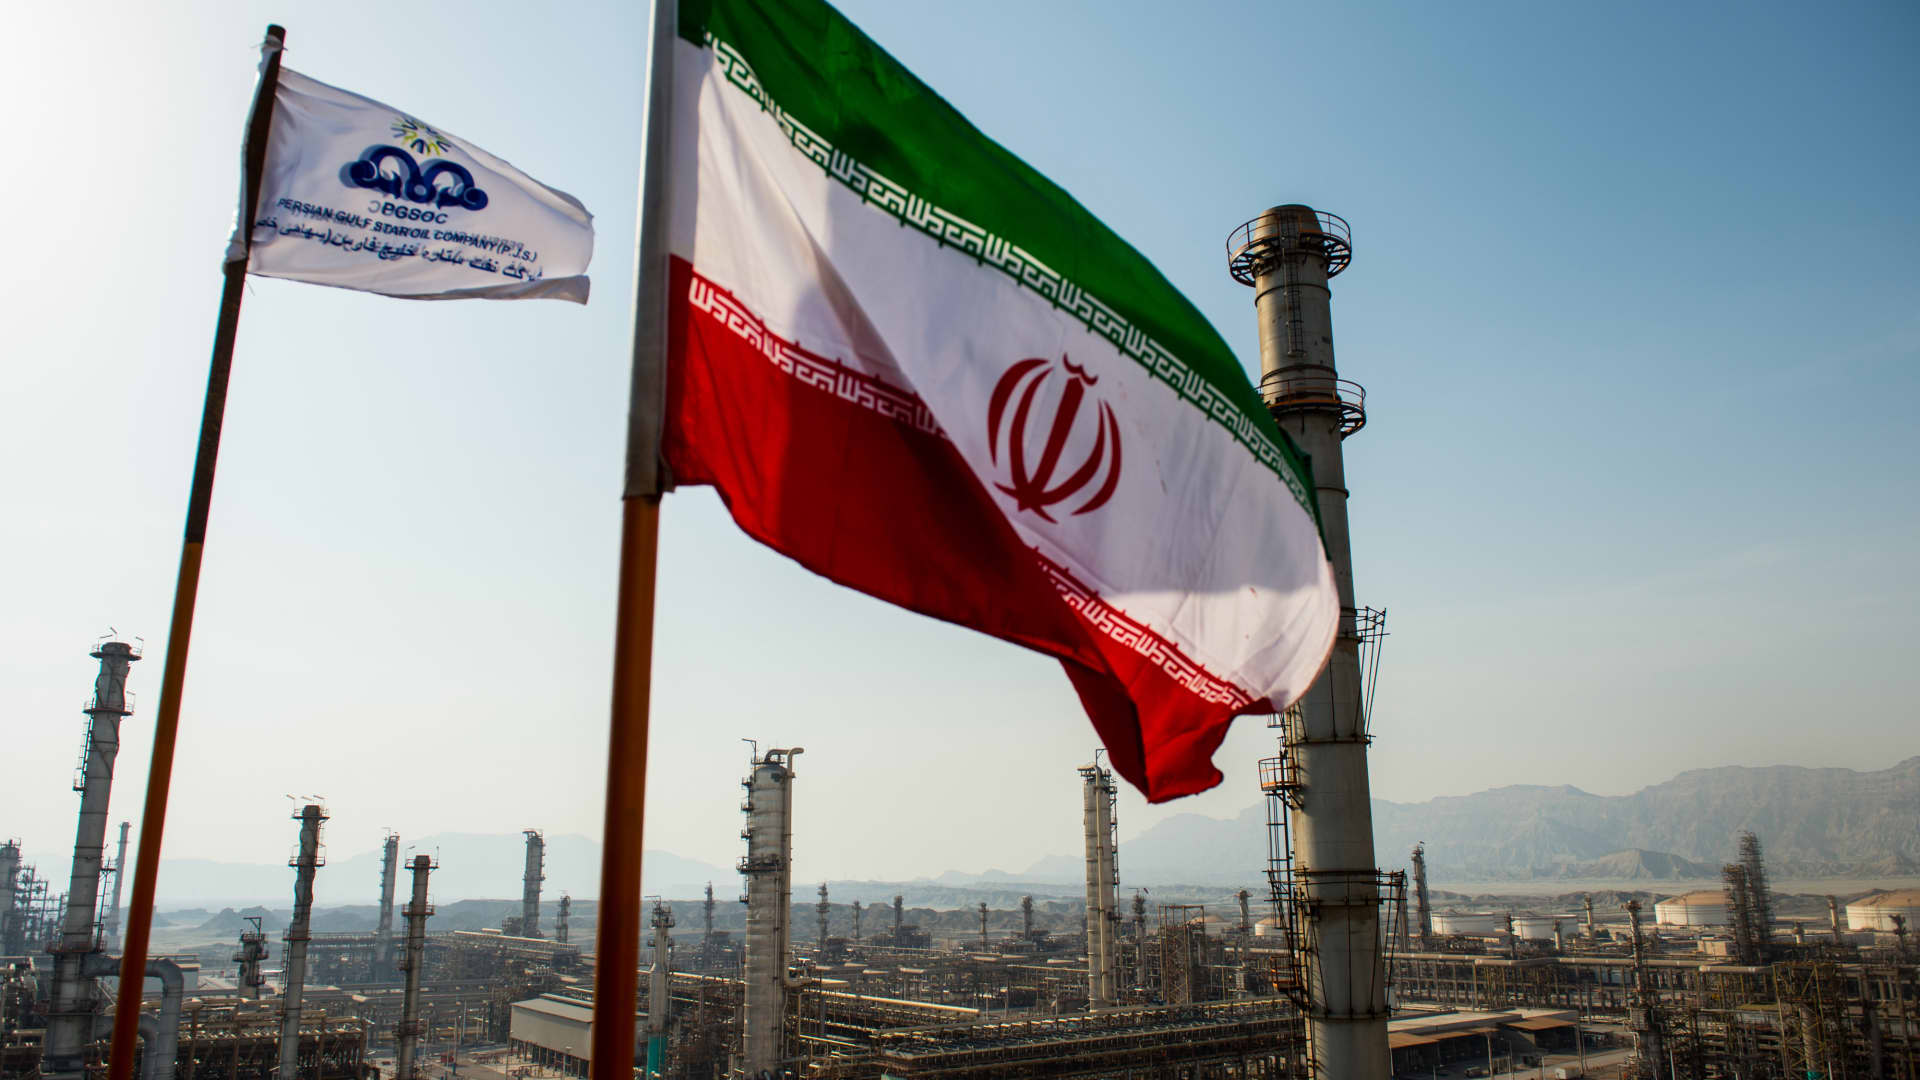 An Iranian national flag flies above the new Phase 3 facility at the Persian Gulf Star Co. (PGSPC) gas condensate refinery in Bandar Abbas, Iran, on Wednesday, Jan. 9. 2019. The third phase of the refinery begins operations next week and will add 12-15 million liters a day of gasoline output capacity to the plant, Deputy Oil Minister Alireza Sadeghabadi told reporters.